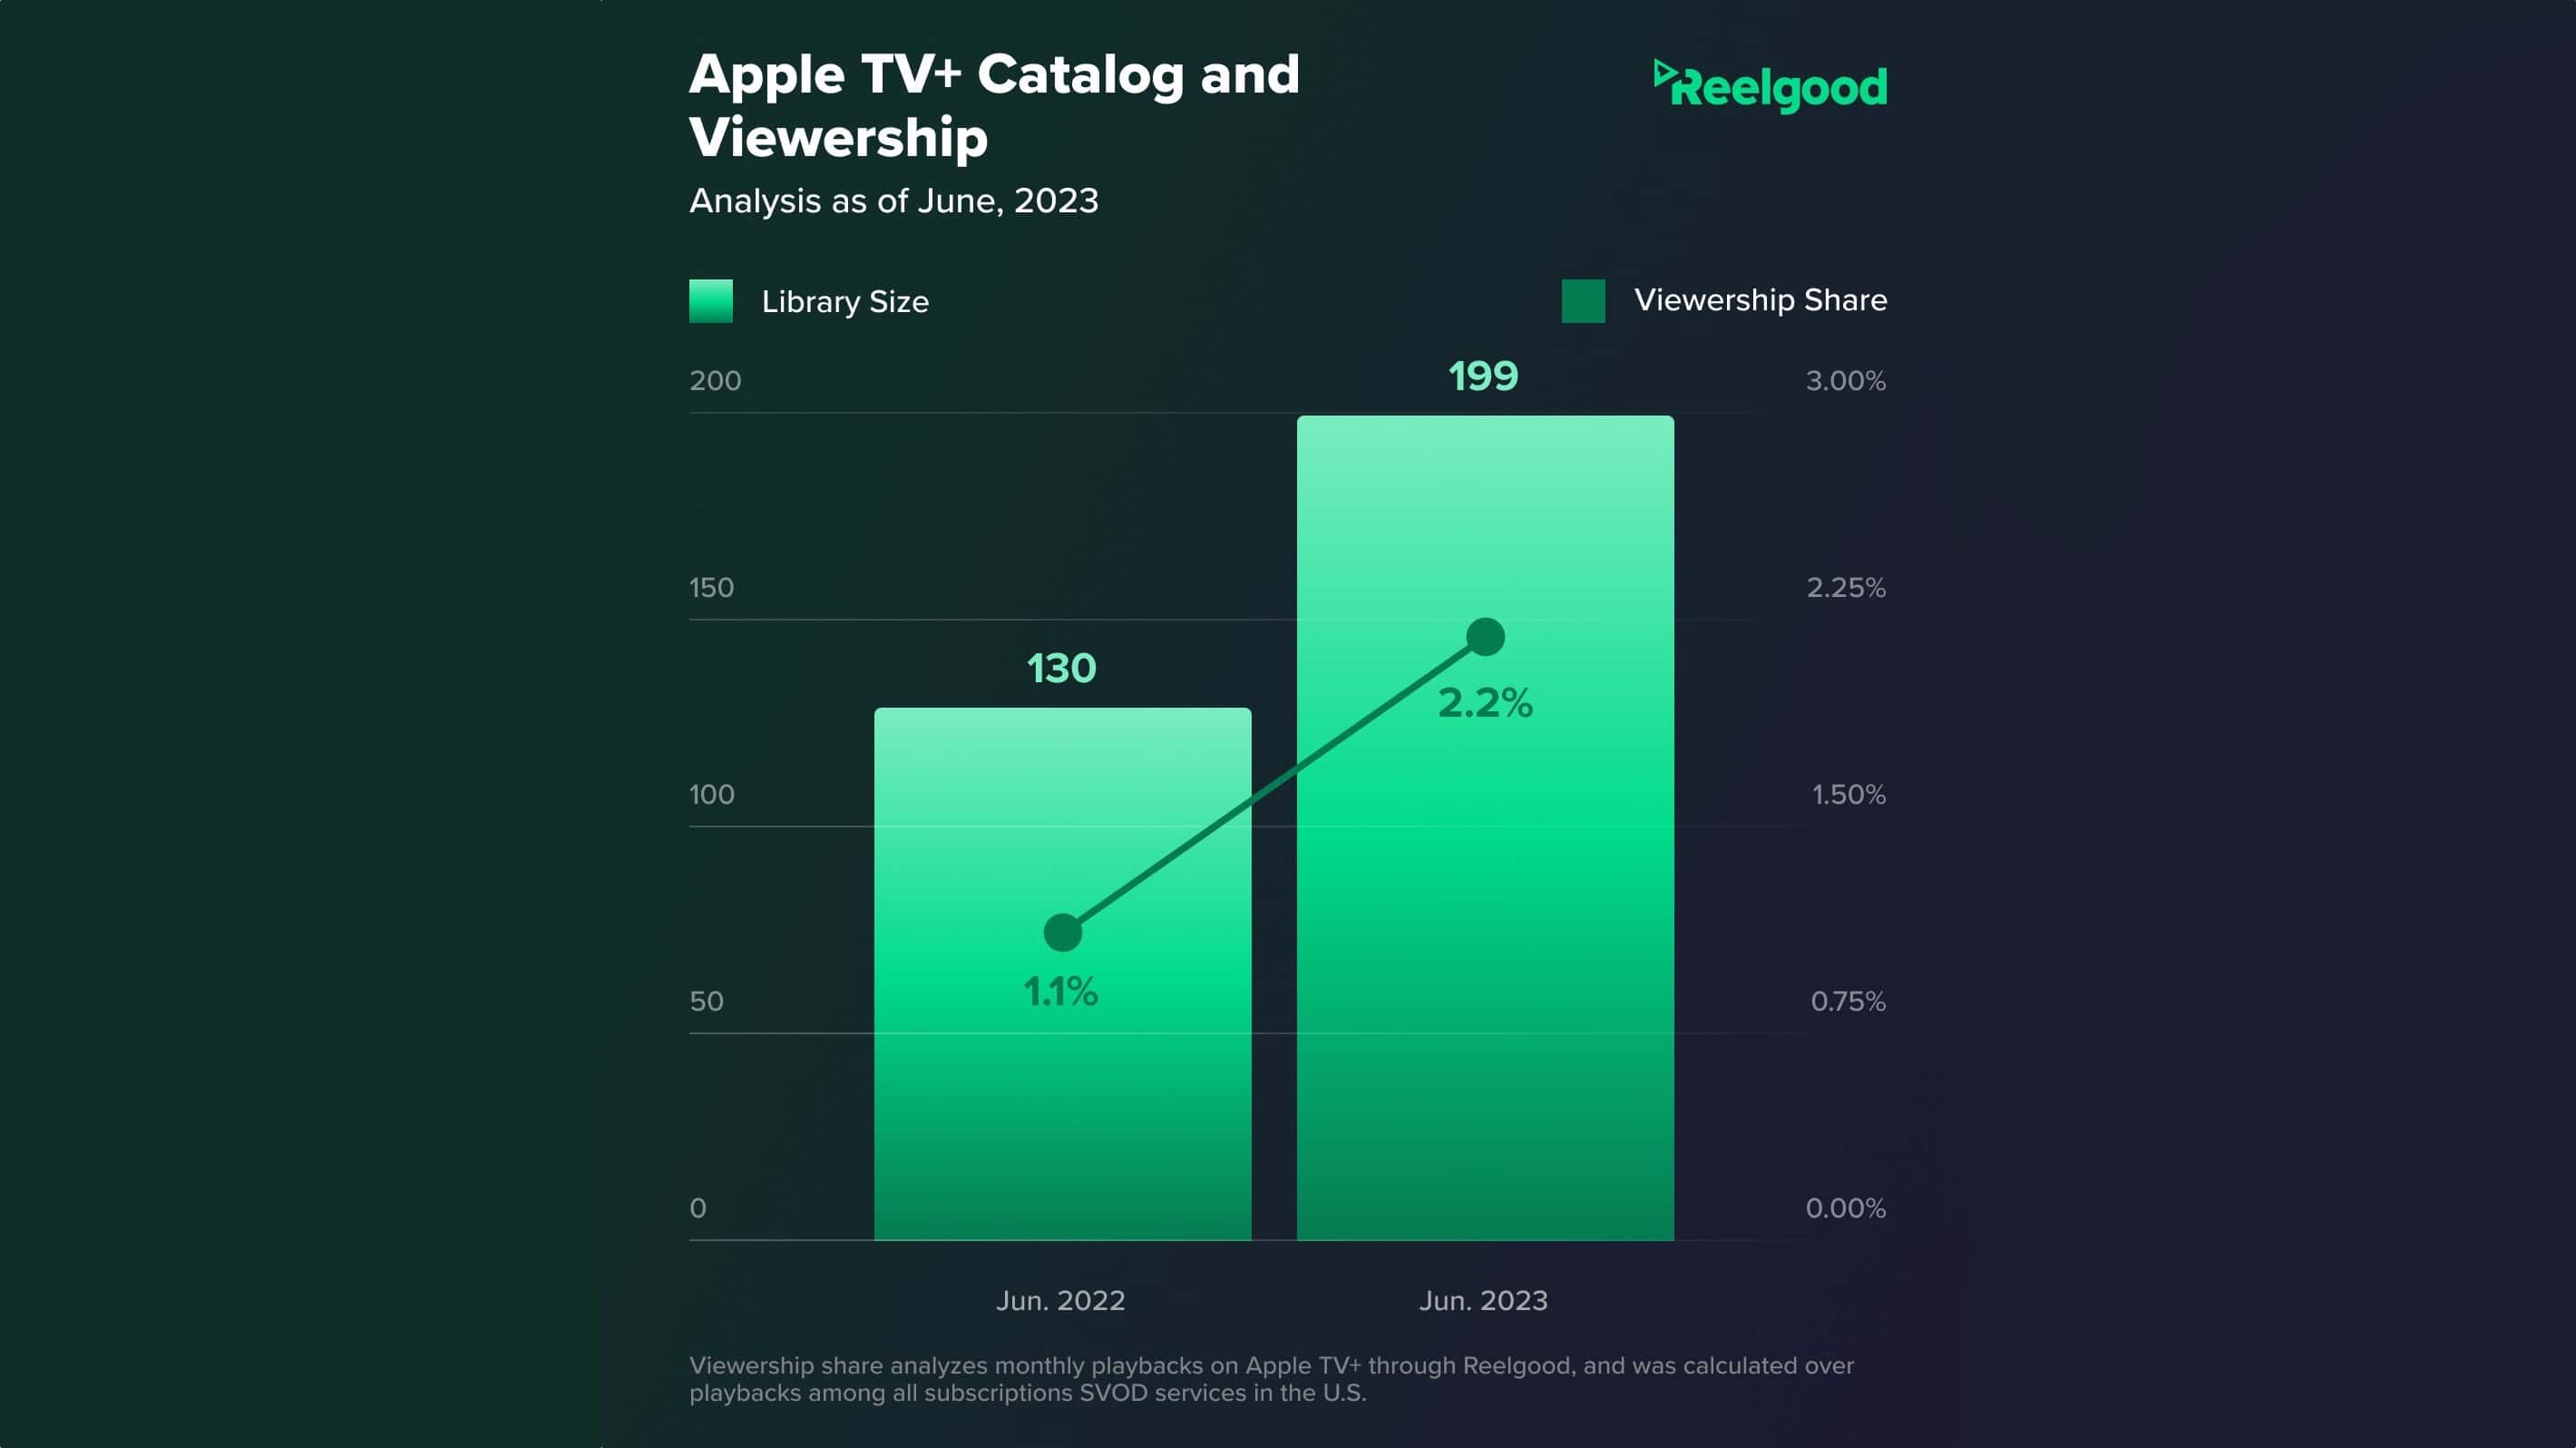 Apple TV+ film and series catalog grew over 50% in the last year